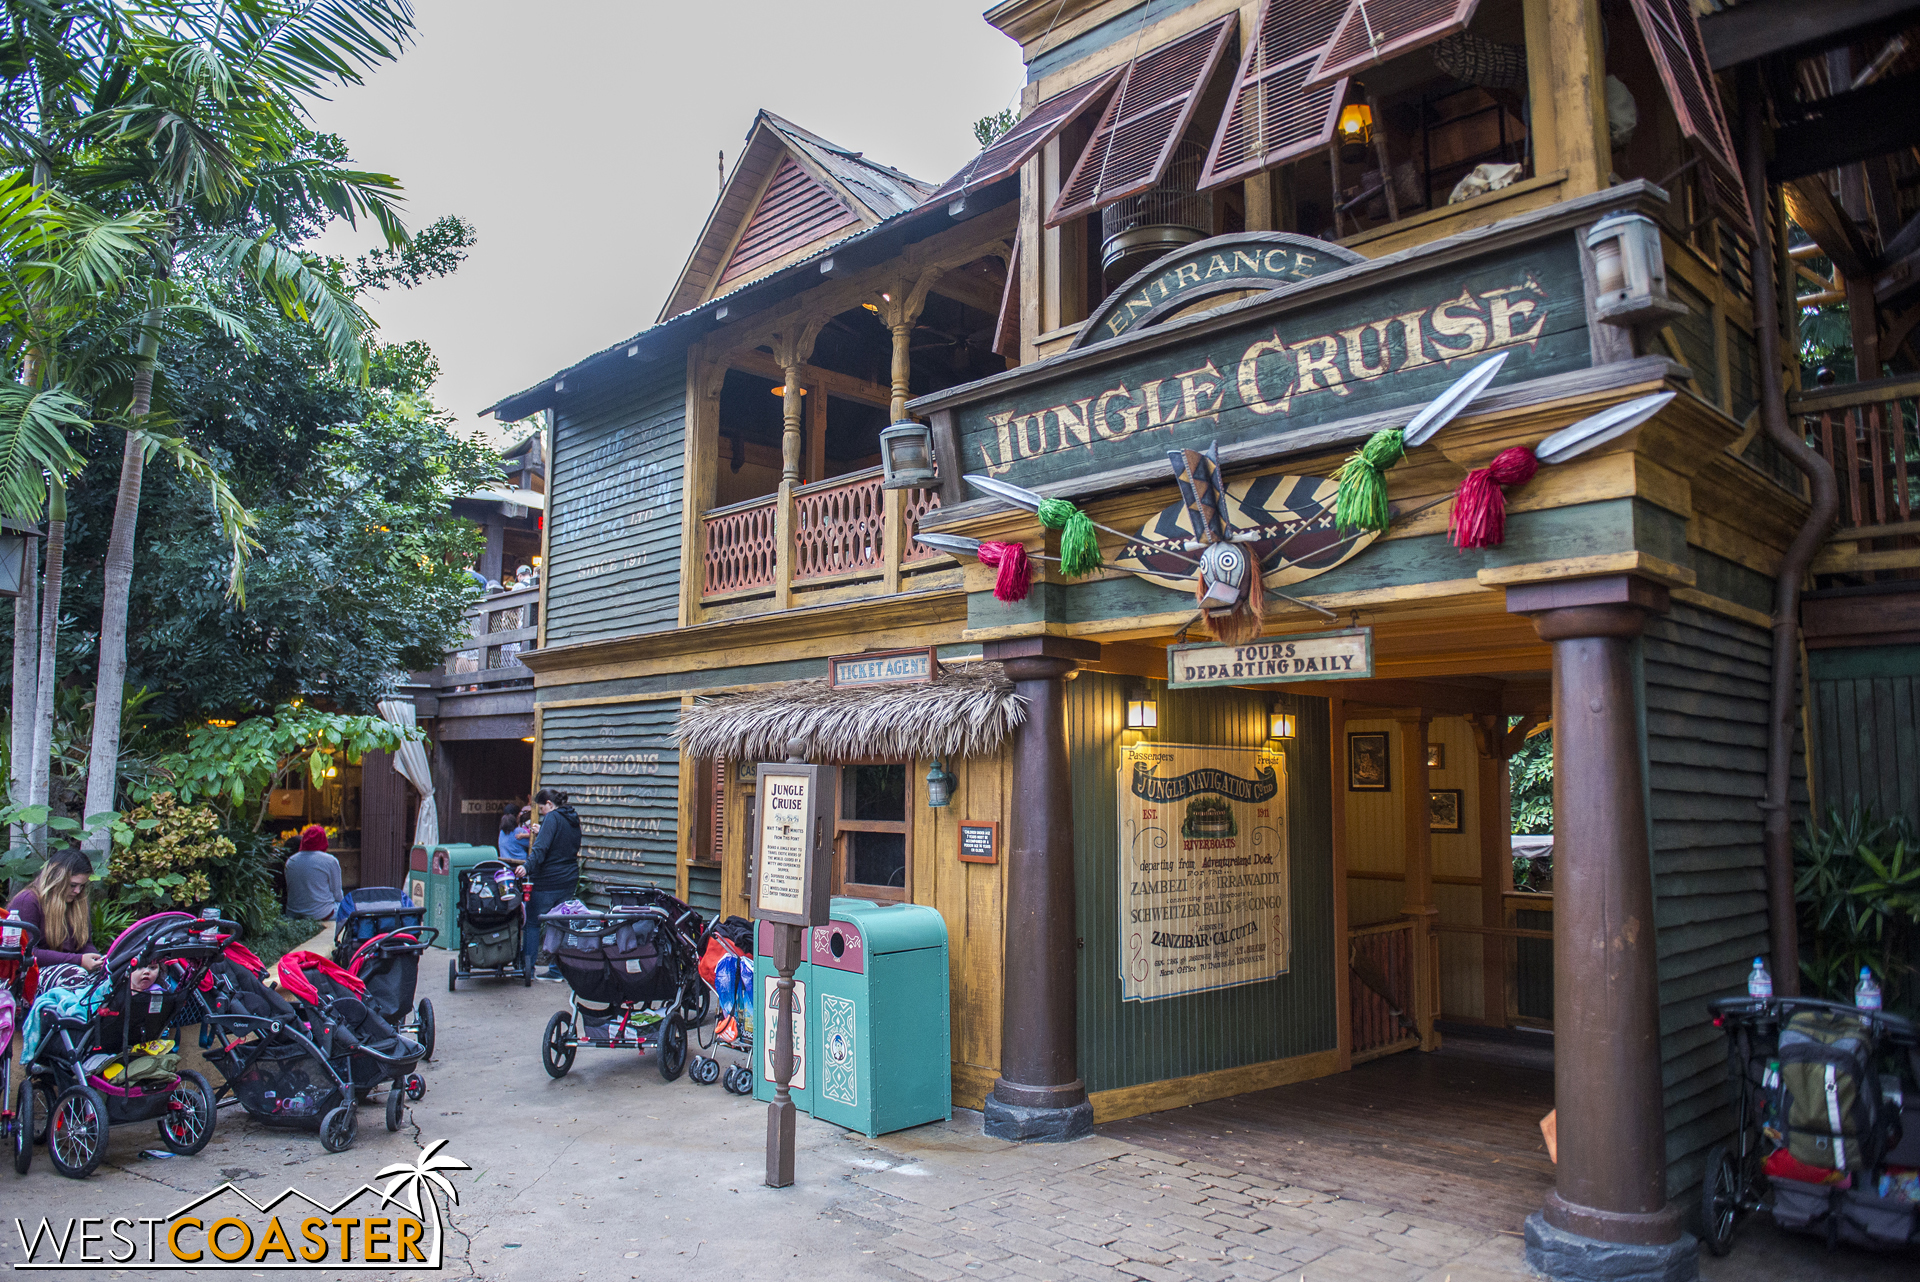  The Jungle Cruise is back open and no longer Christmas-y. 